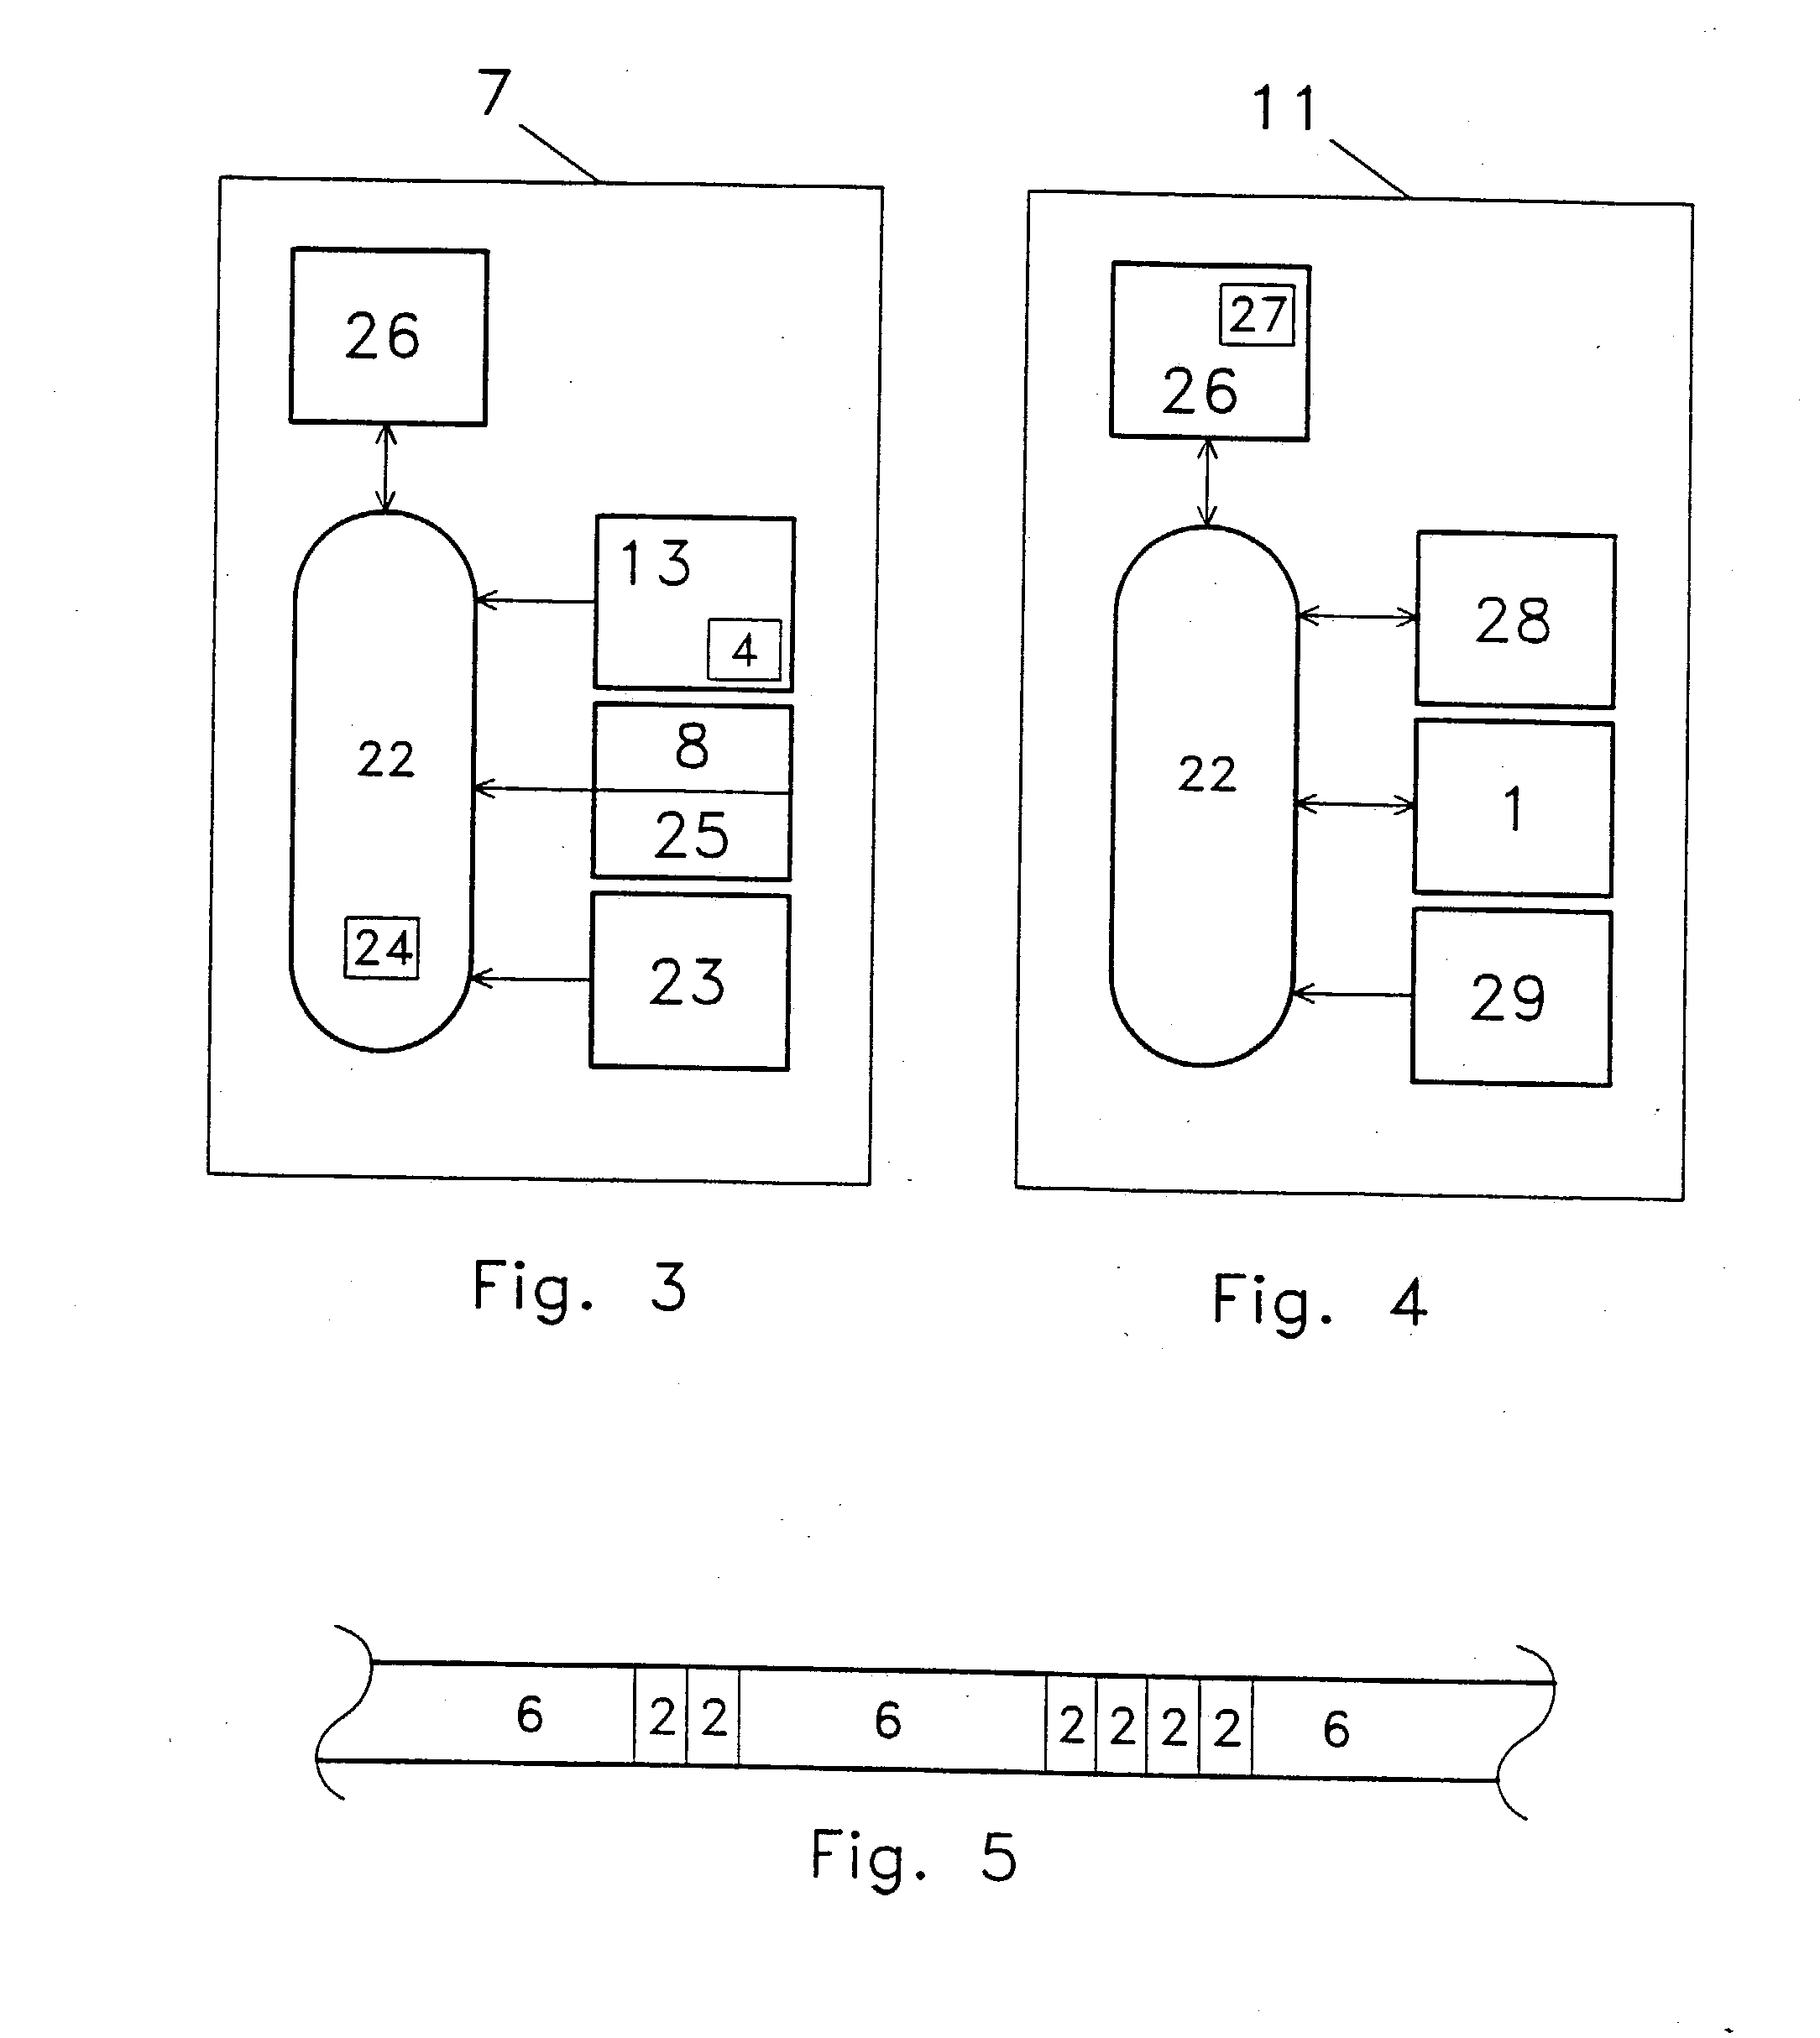 System for the creation of database and structured information from verbal input